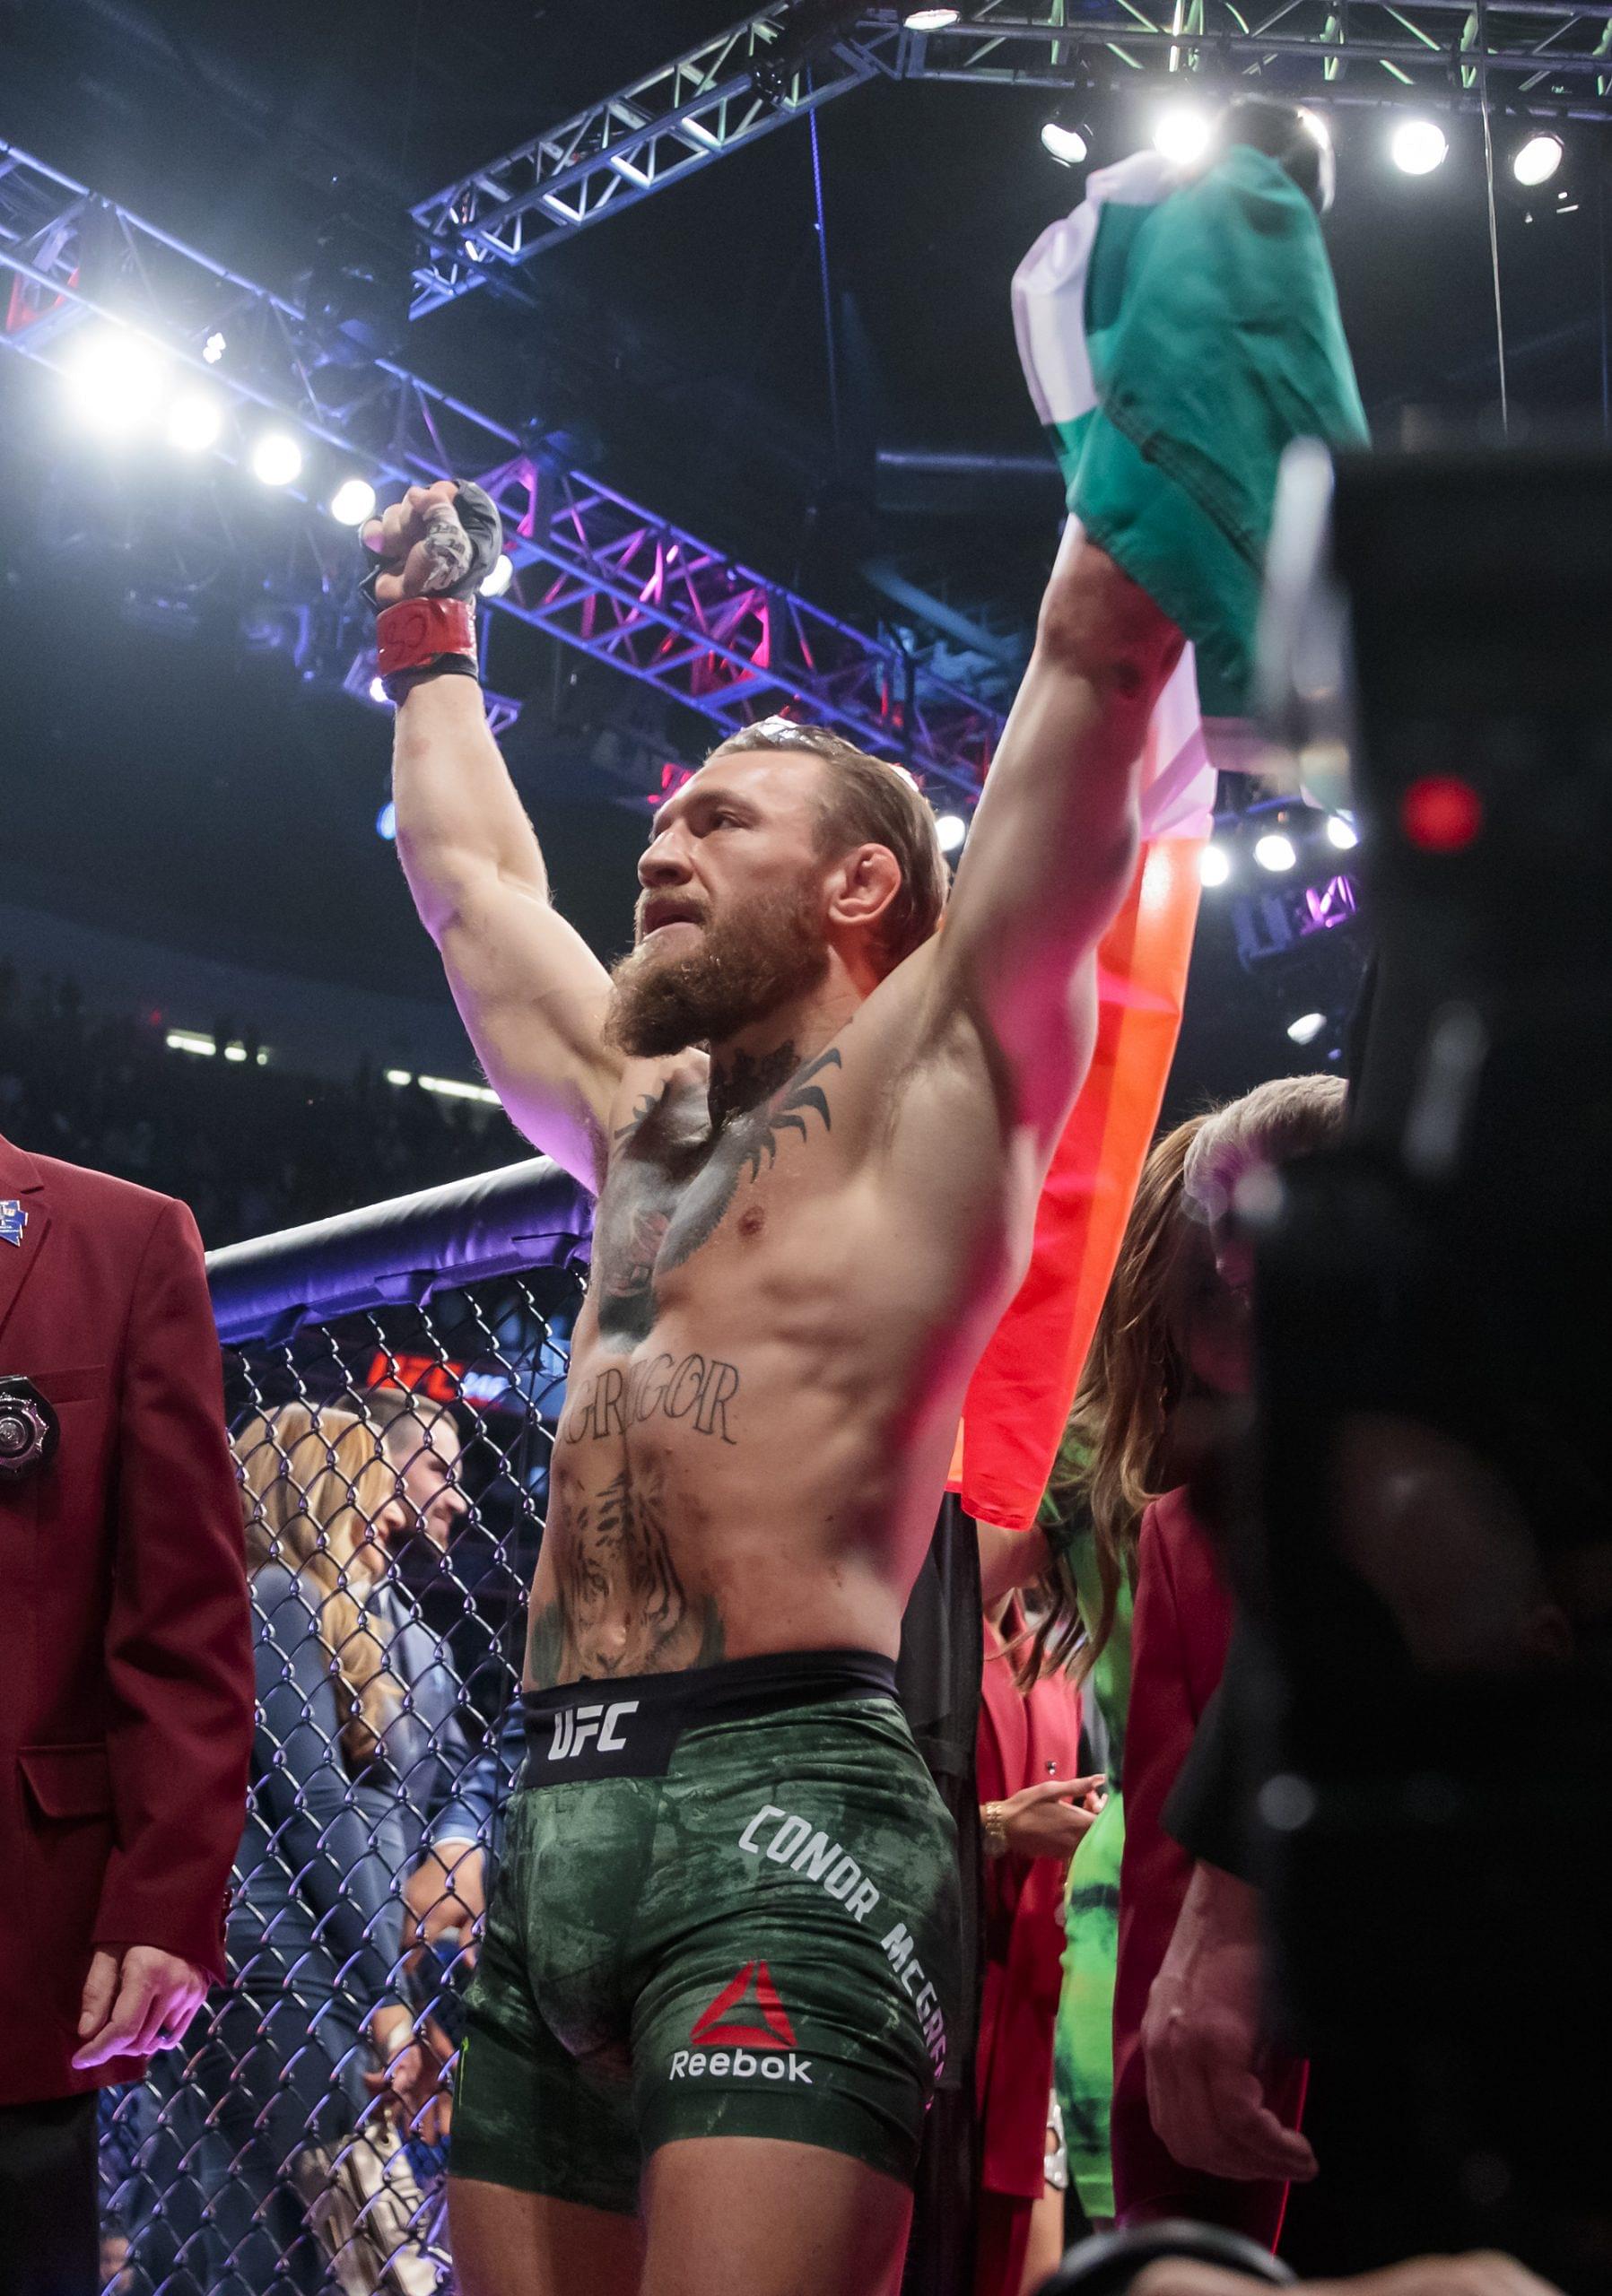 Conor McGregor takes to Twitter to express his interest in buying the Club, saying "I WOULD LOVE IT!"